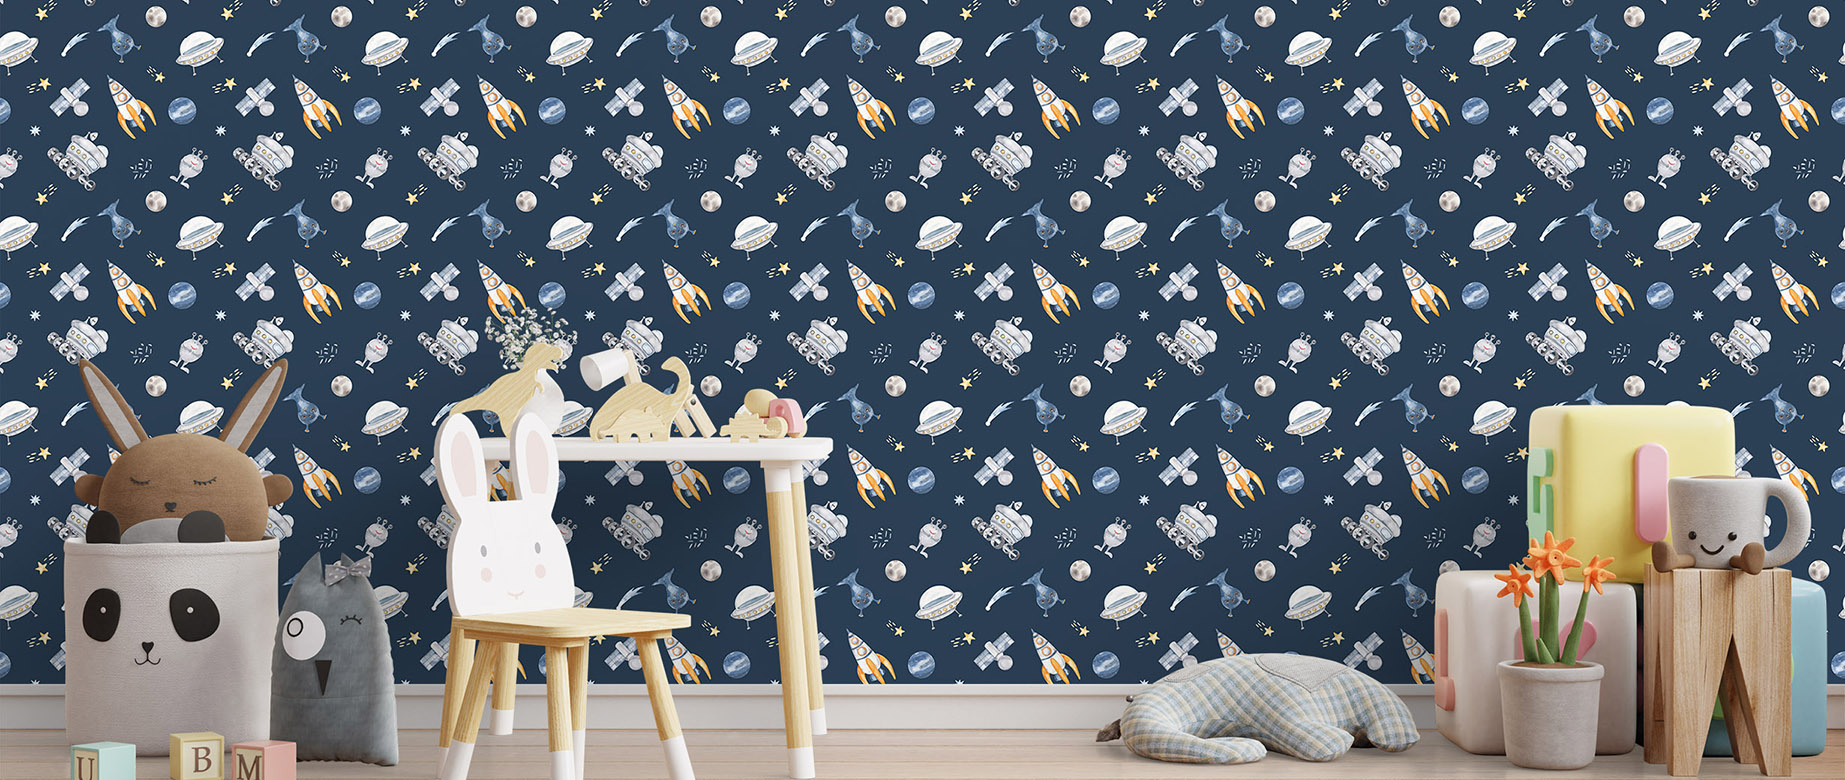 blue-planets-design-Seamless design repeat pattern wallpaper-in-wide-room